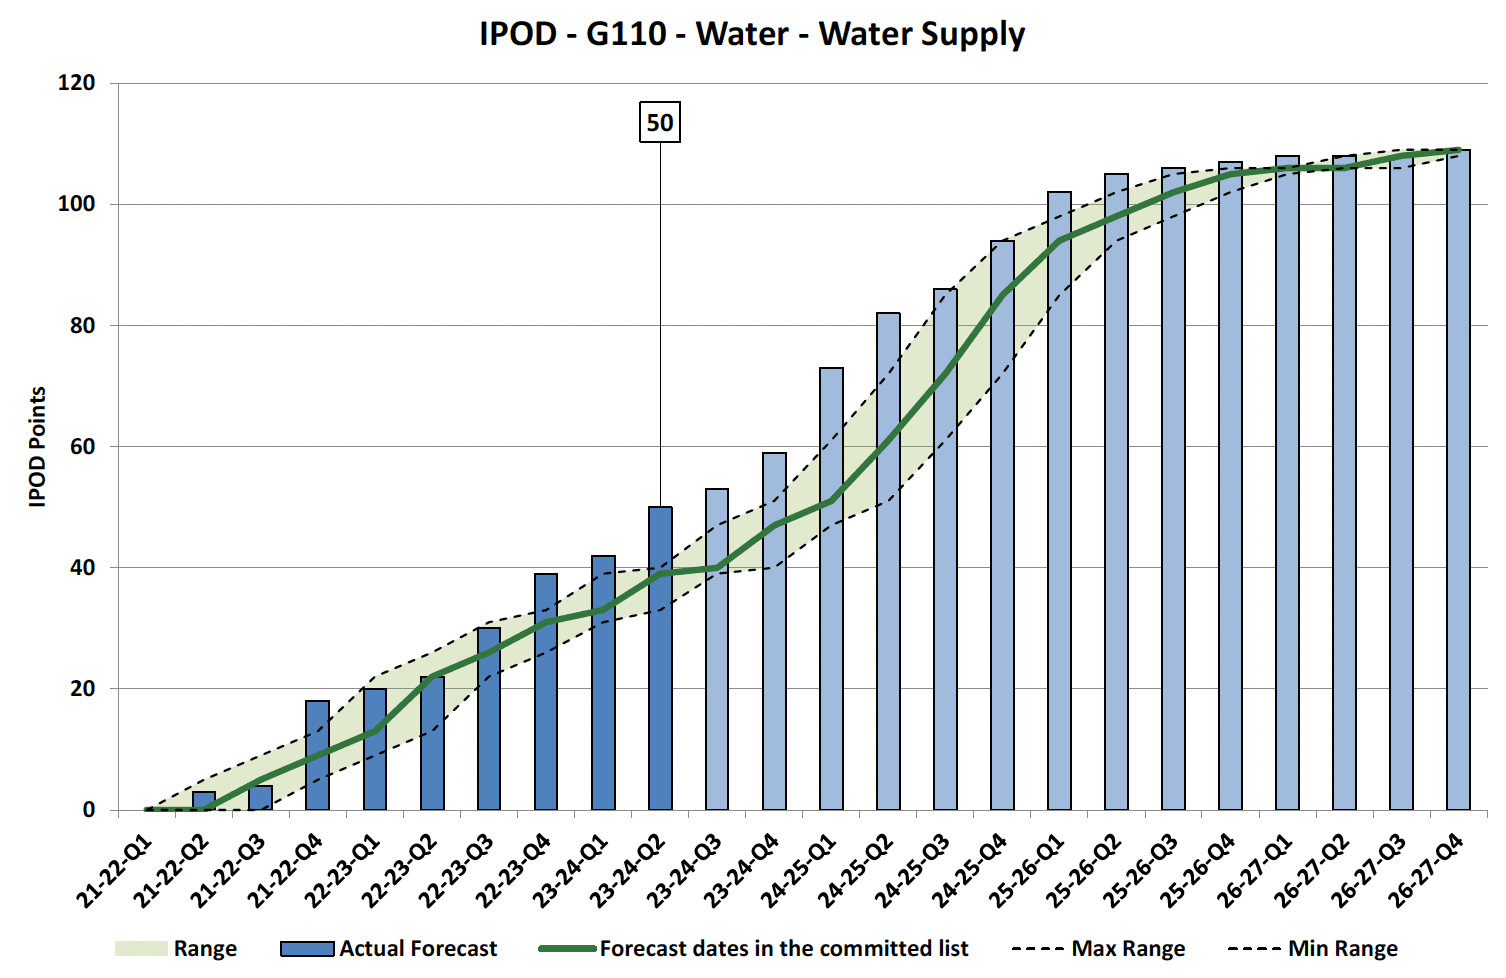 Chart showing IPOD points achieved or forecast for Financial Completion milestone against target range for Water Supply Projects in Water Portfolio